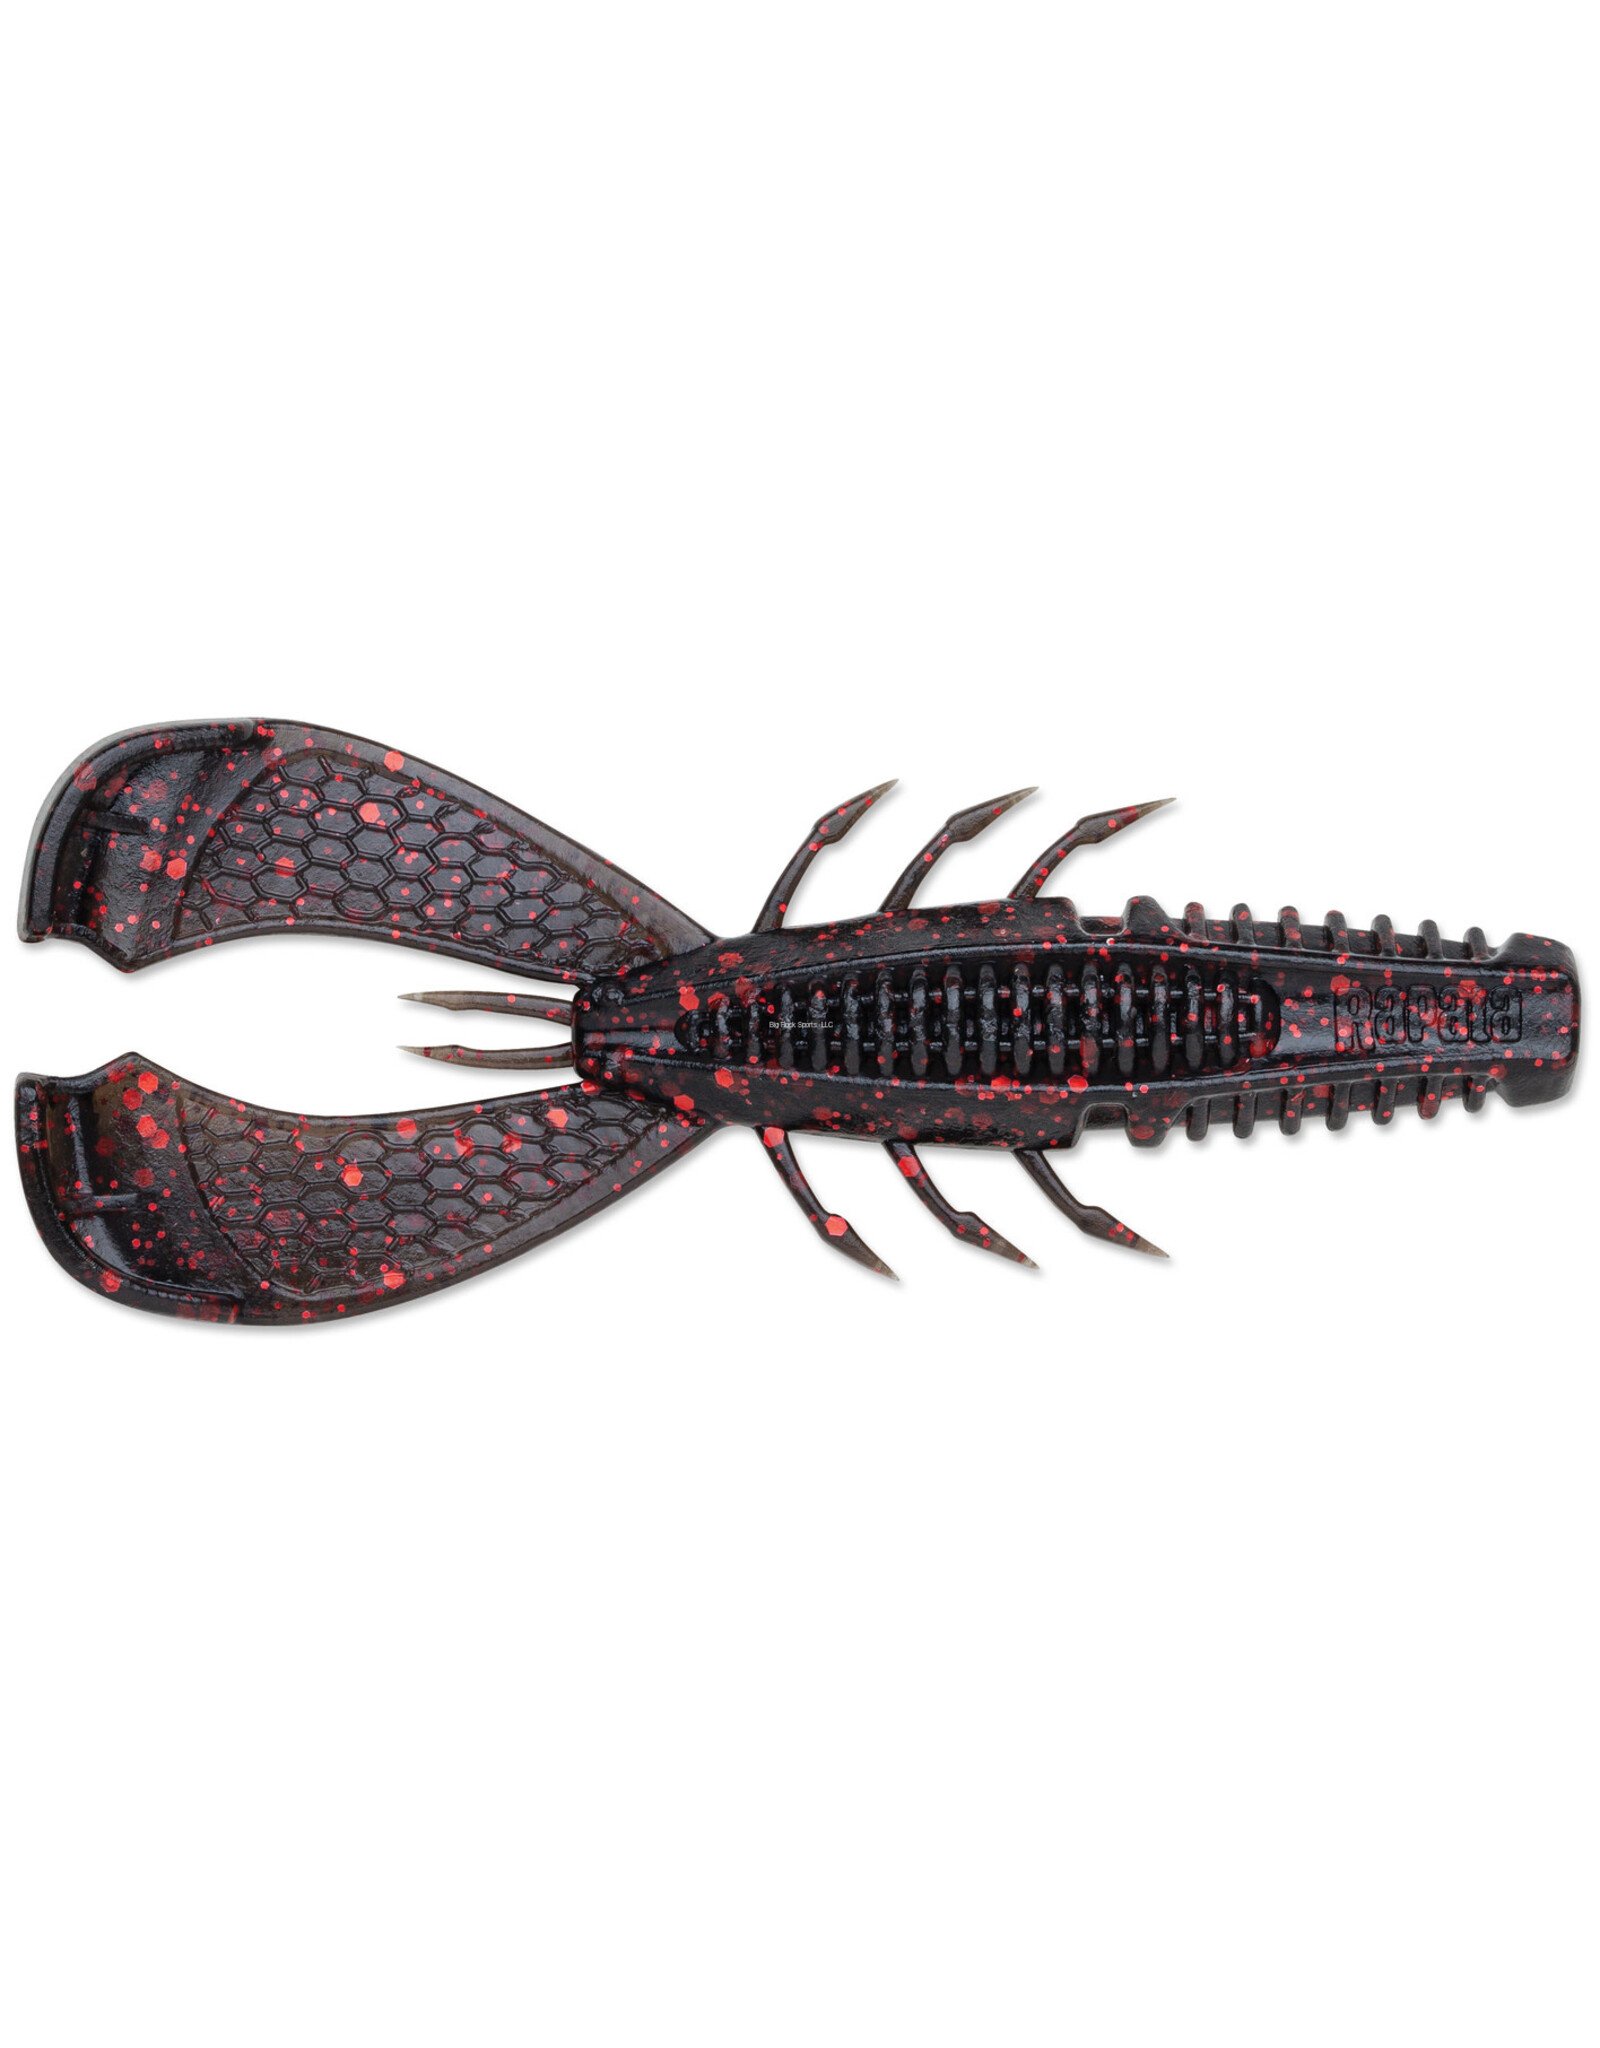 Rapala Rapala CCCLC35BKR CrushCity Cleanup Craw, 3.5", Salt/Scent Infused, 7 Per Package, Black Red Flake